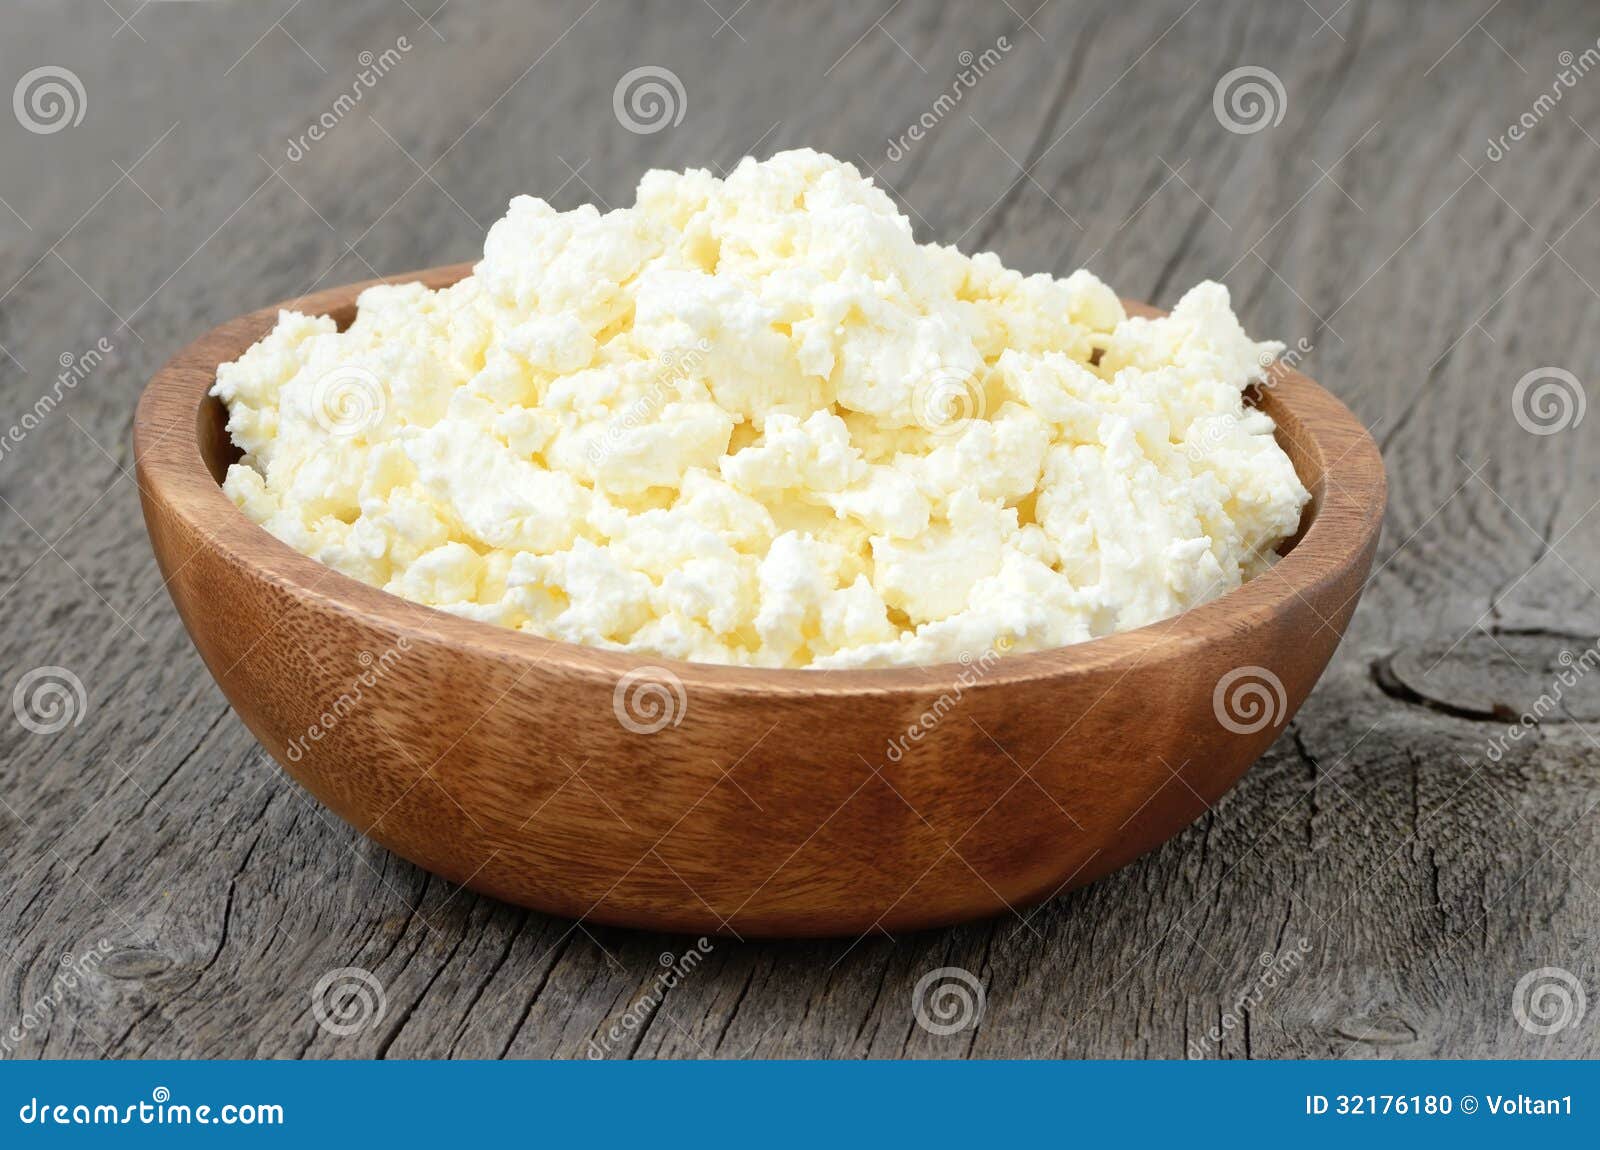 cottage cheese in the bowl